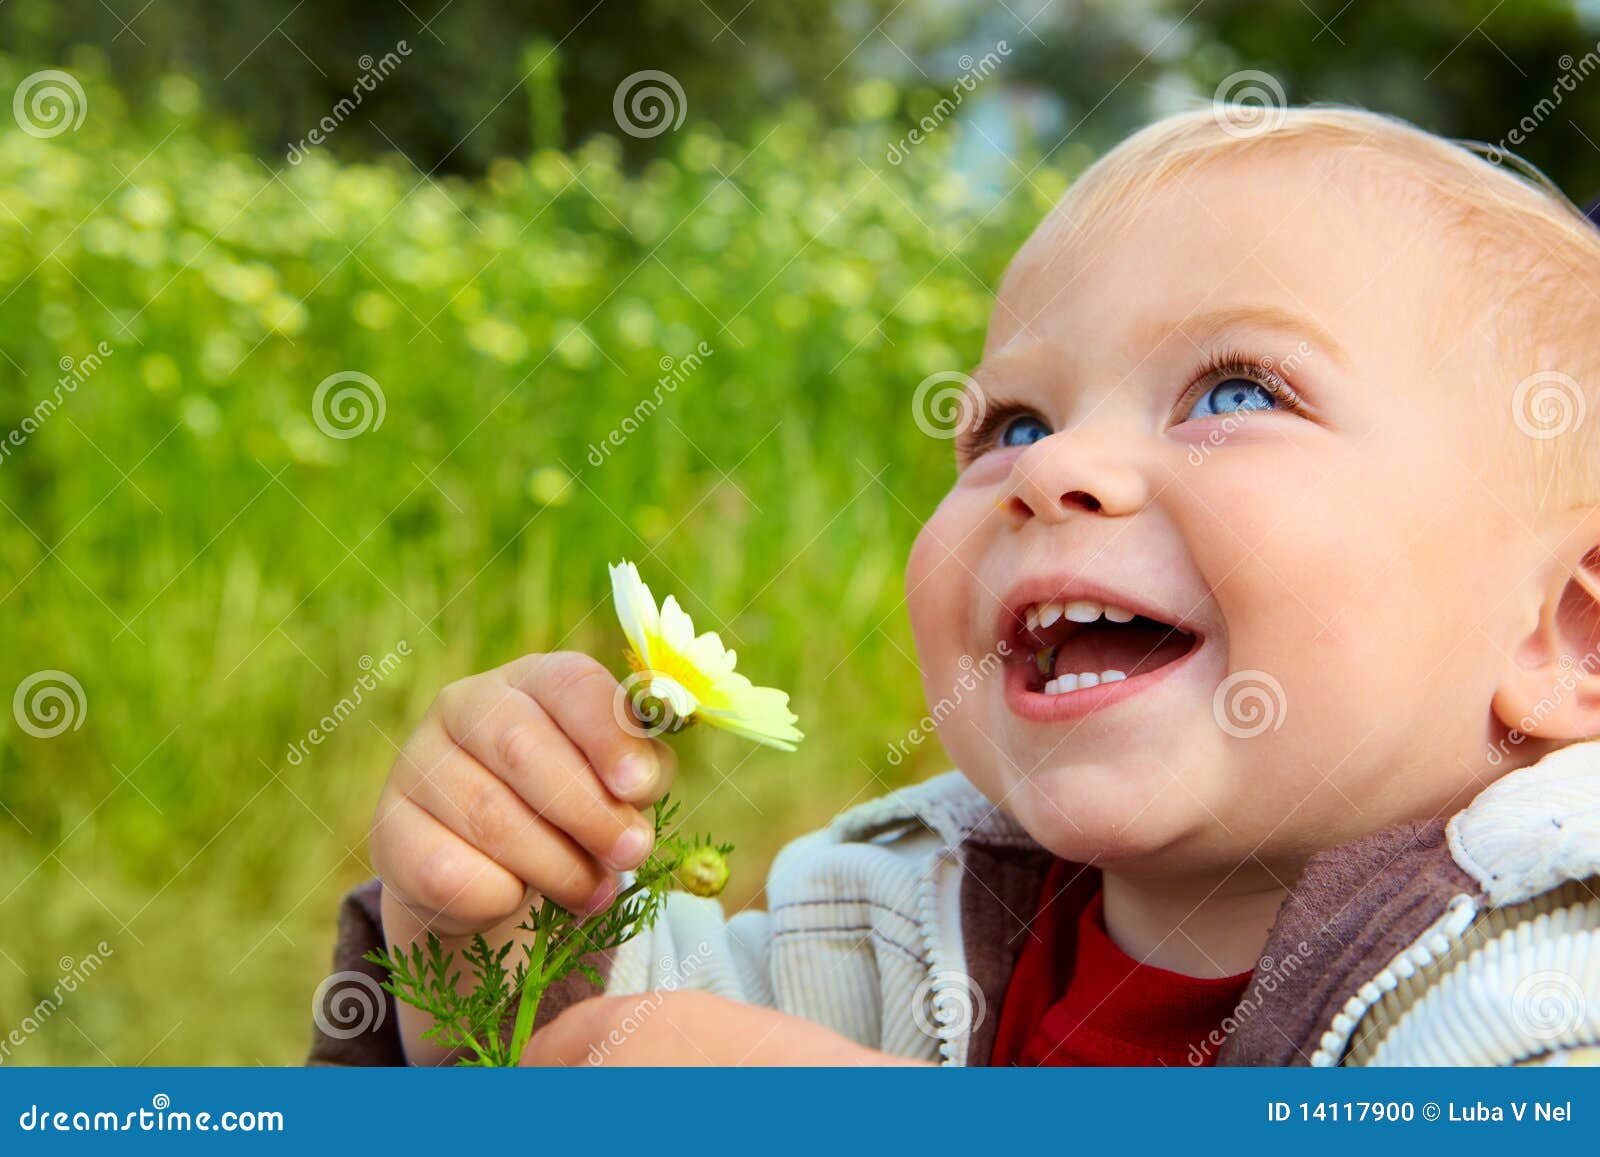 small baby laughing with daisy